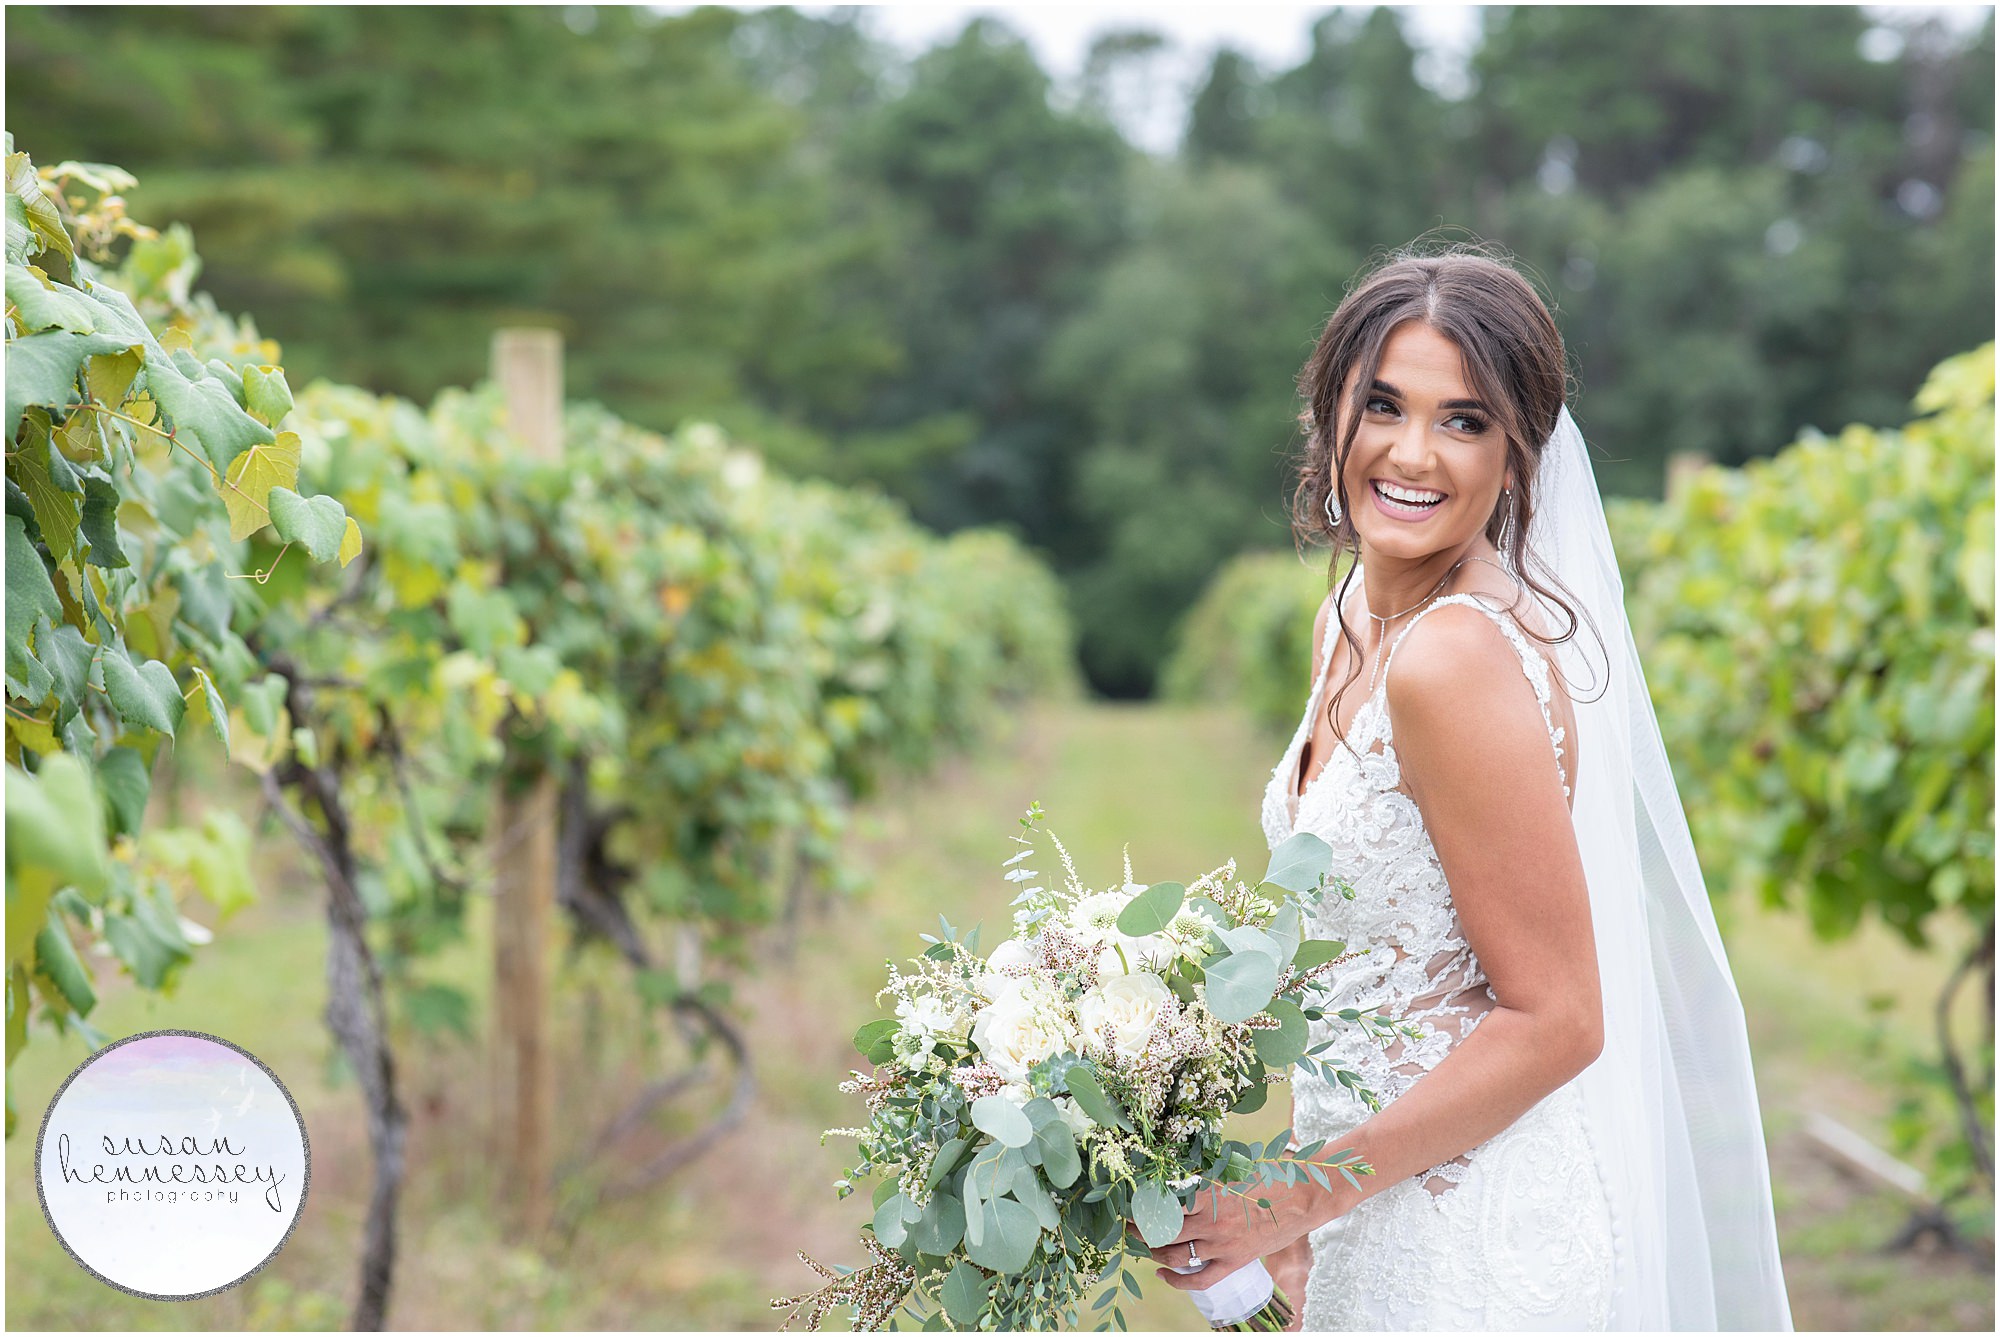 Bridal portraits in the vines at Renault Winery wedding